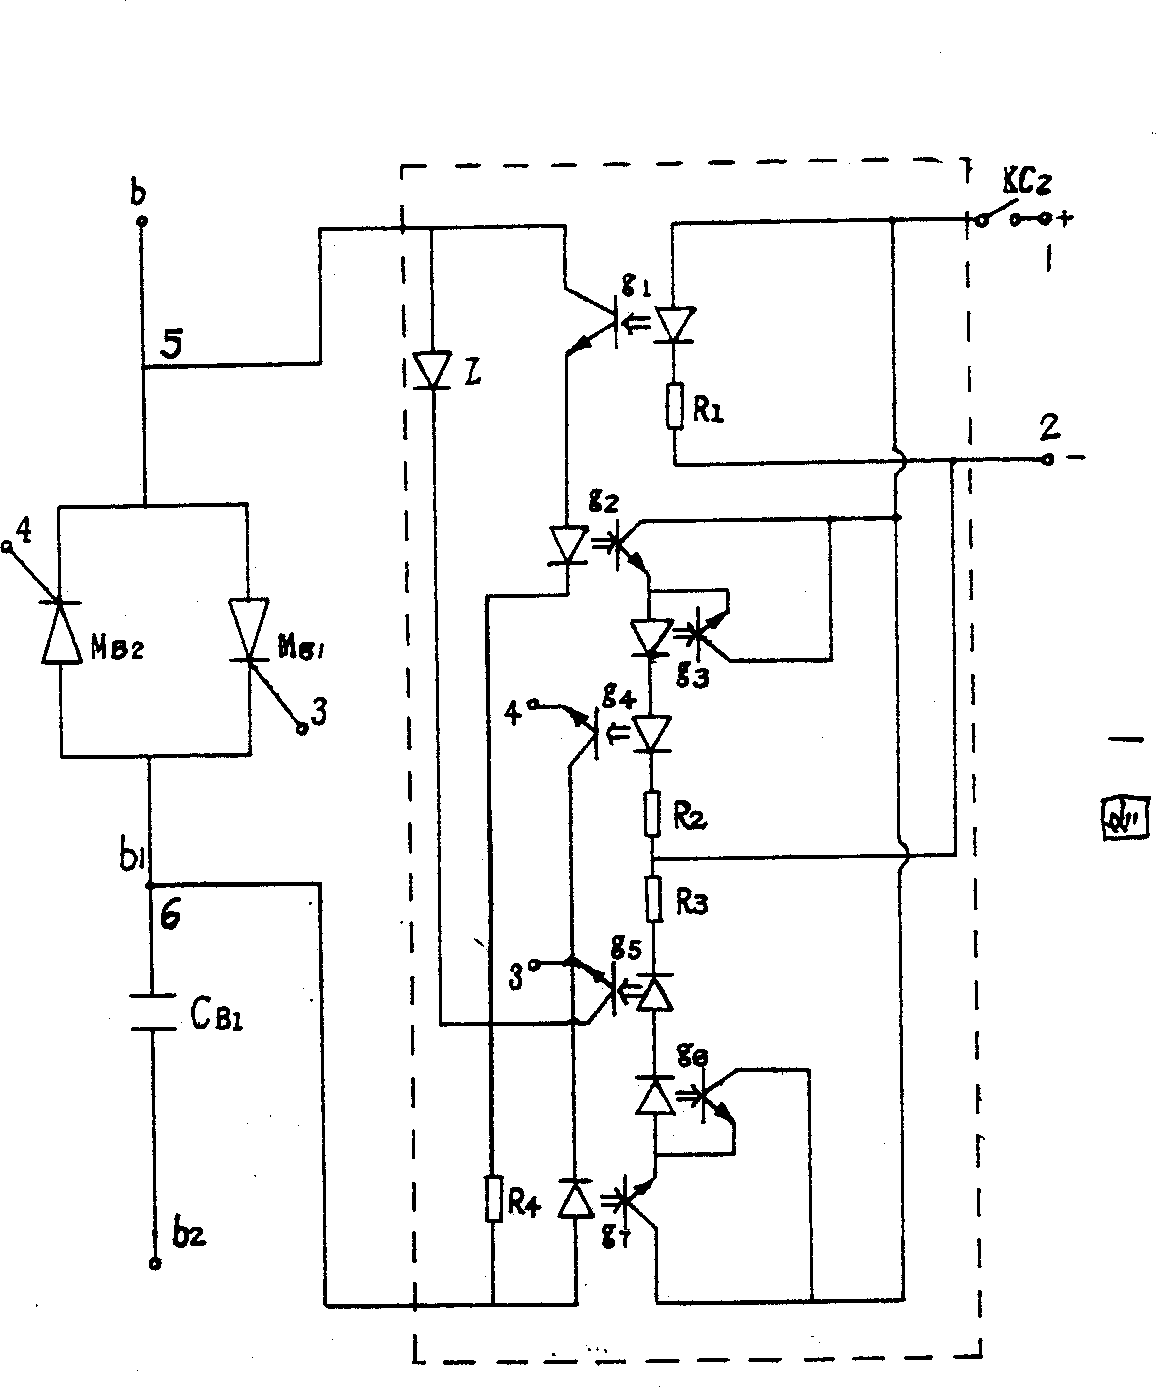 No-delay zero-crossing trigger circuit with thuristor throw-in and throw-off capacitor